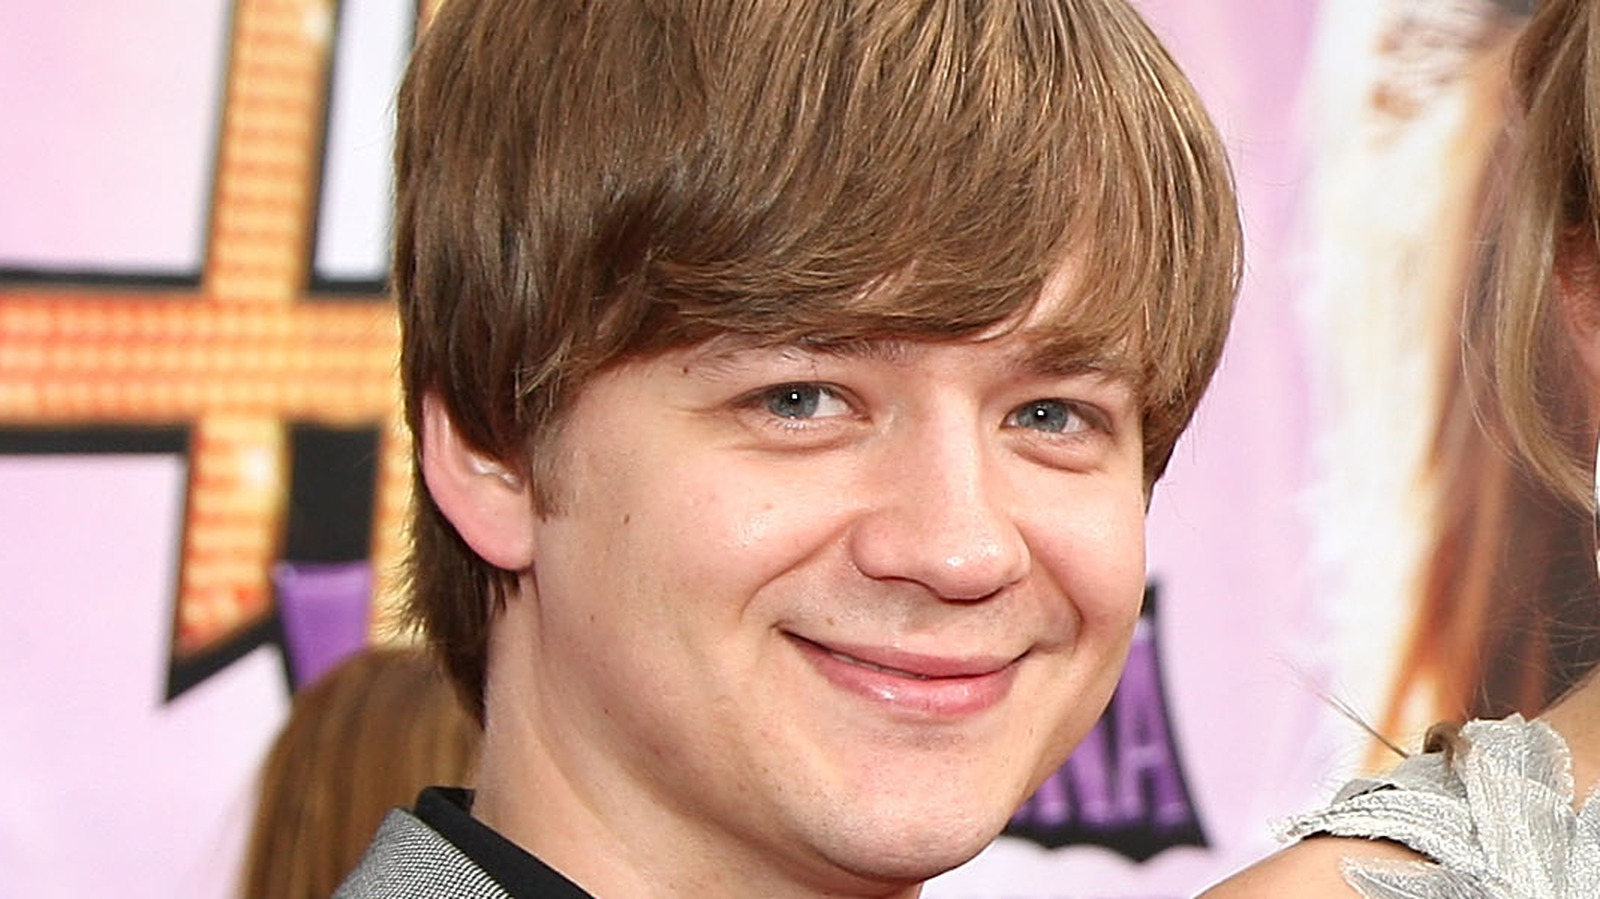 Here's What Disney Star Jason Earles Looks Like Today.